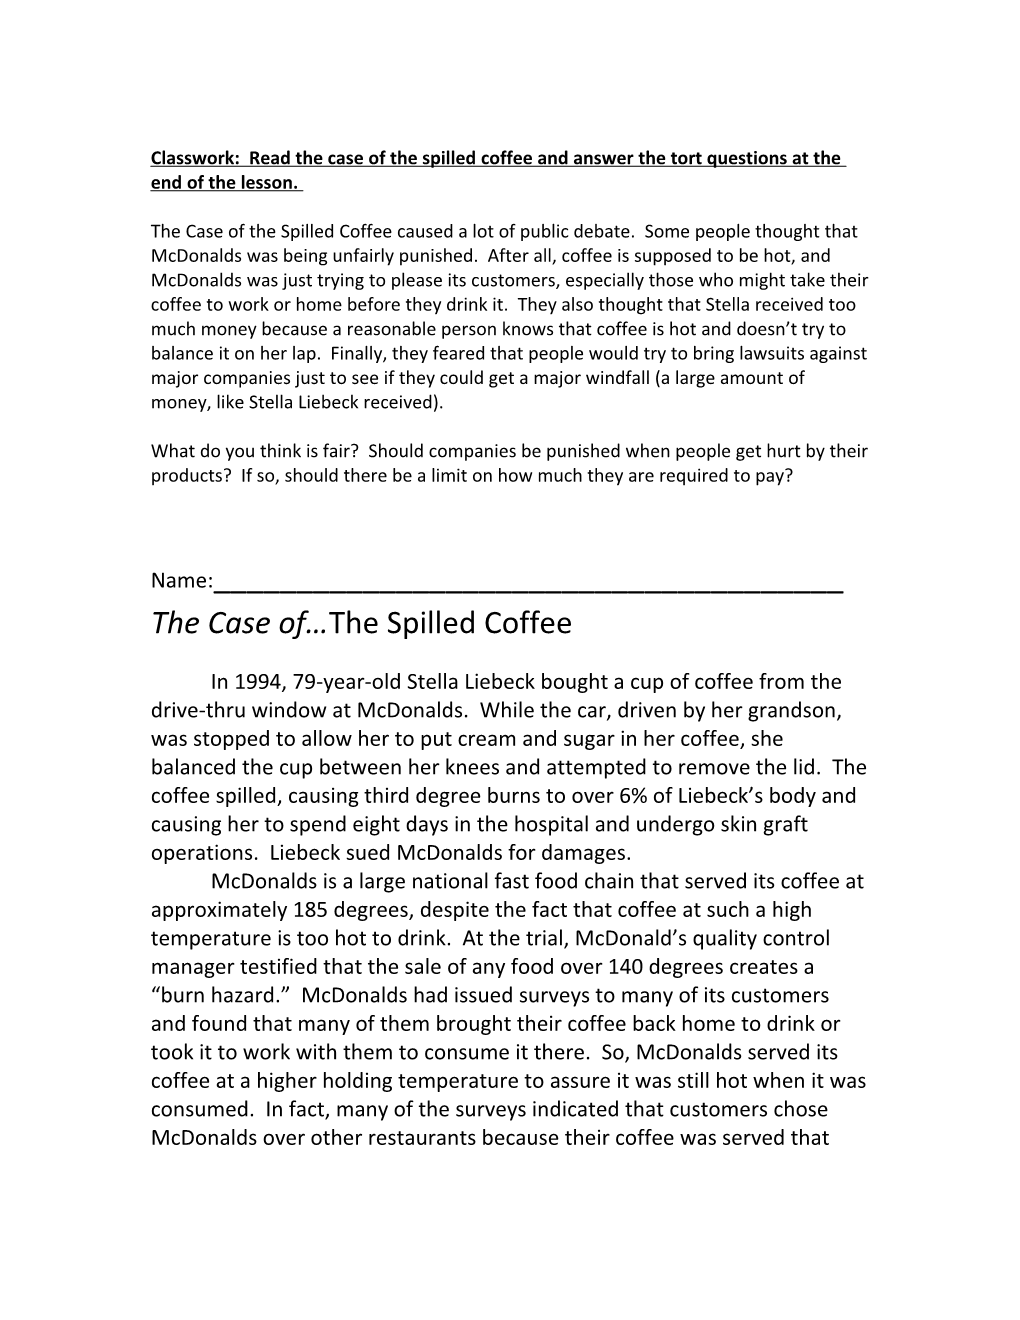 Classwork: Read the Case of the Spilled Coffee and Answer the Tort Questions at the End